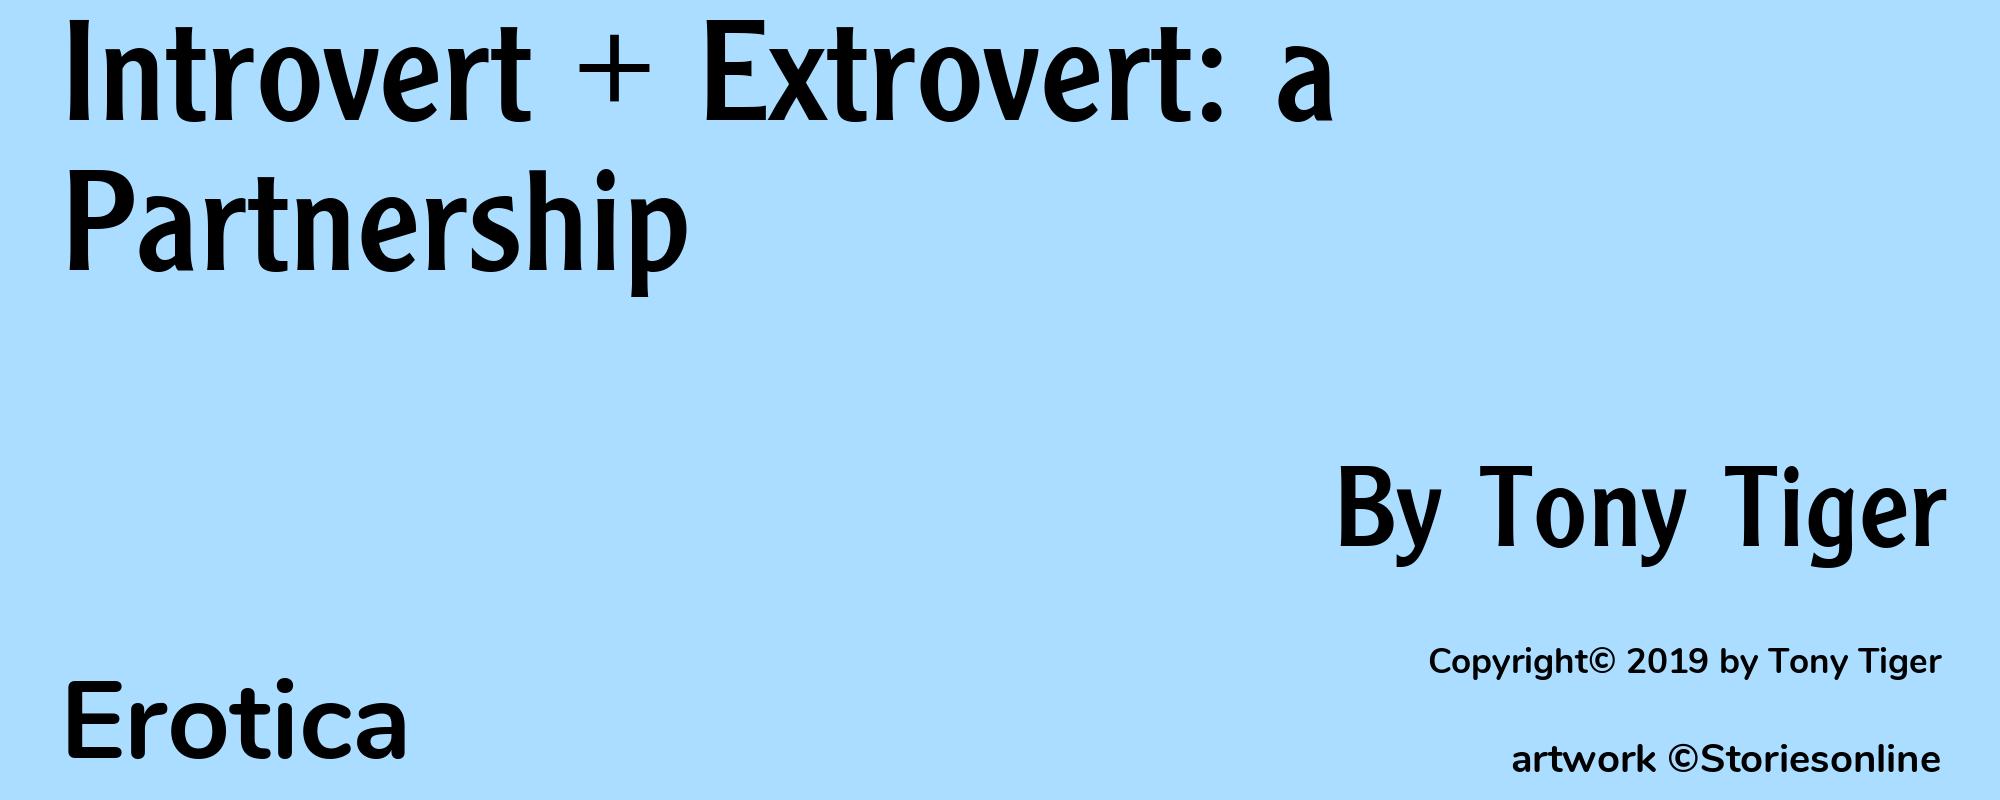 Introvert + Extrovert: a Partnership - Cover